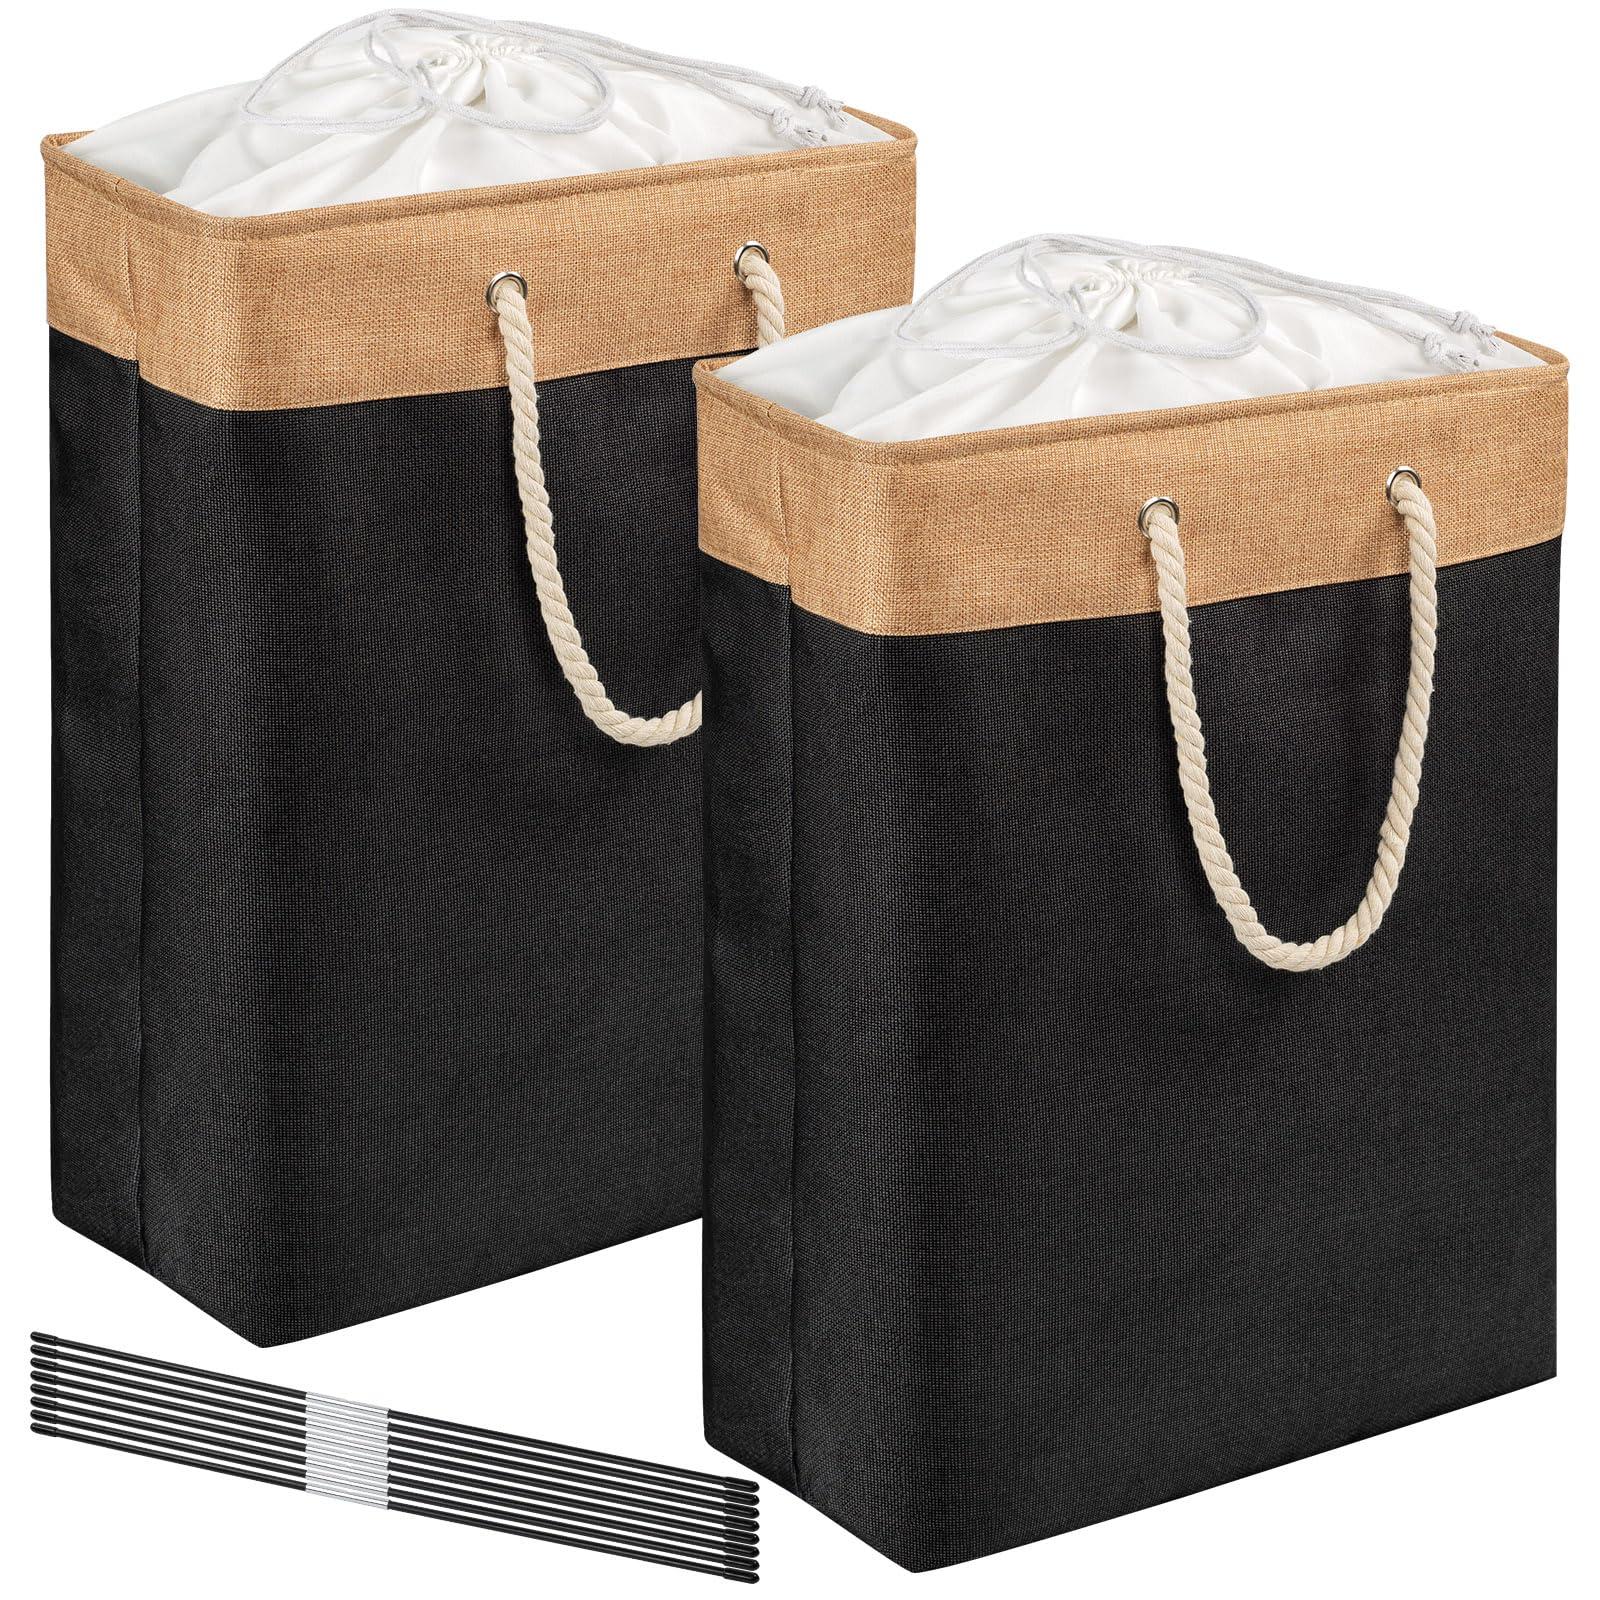 2 Pack Large Laundry Baskets with Lid, Foldable Washing Baskets for Laundry, Bedroom Storage Solutions for Clothes Toys, Laundry Hamper Bags Bin with Handles for Bathroom